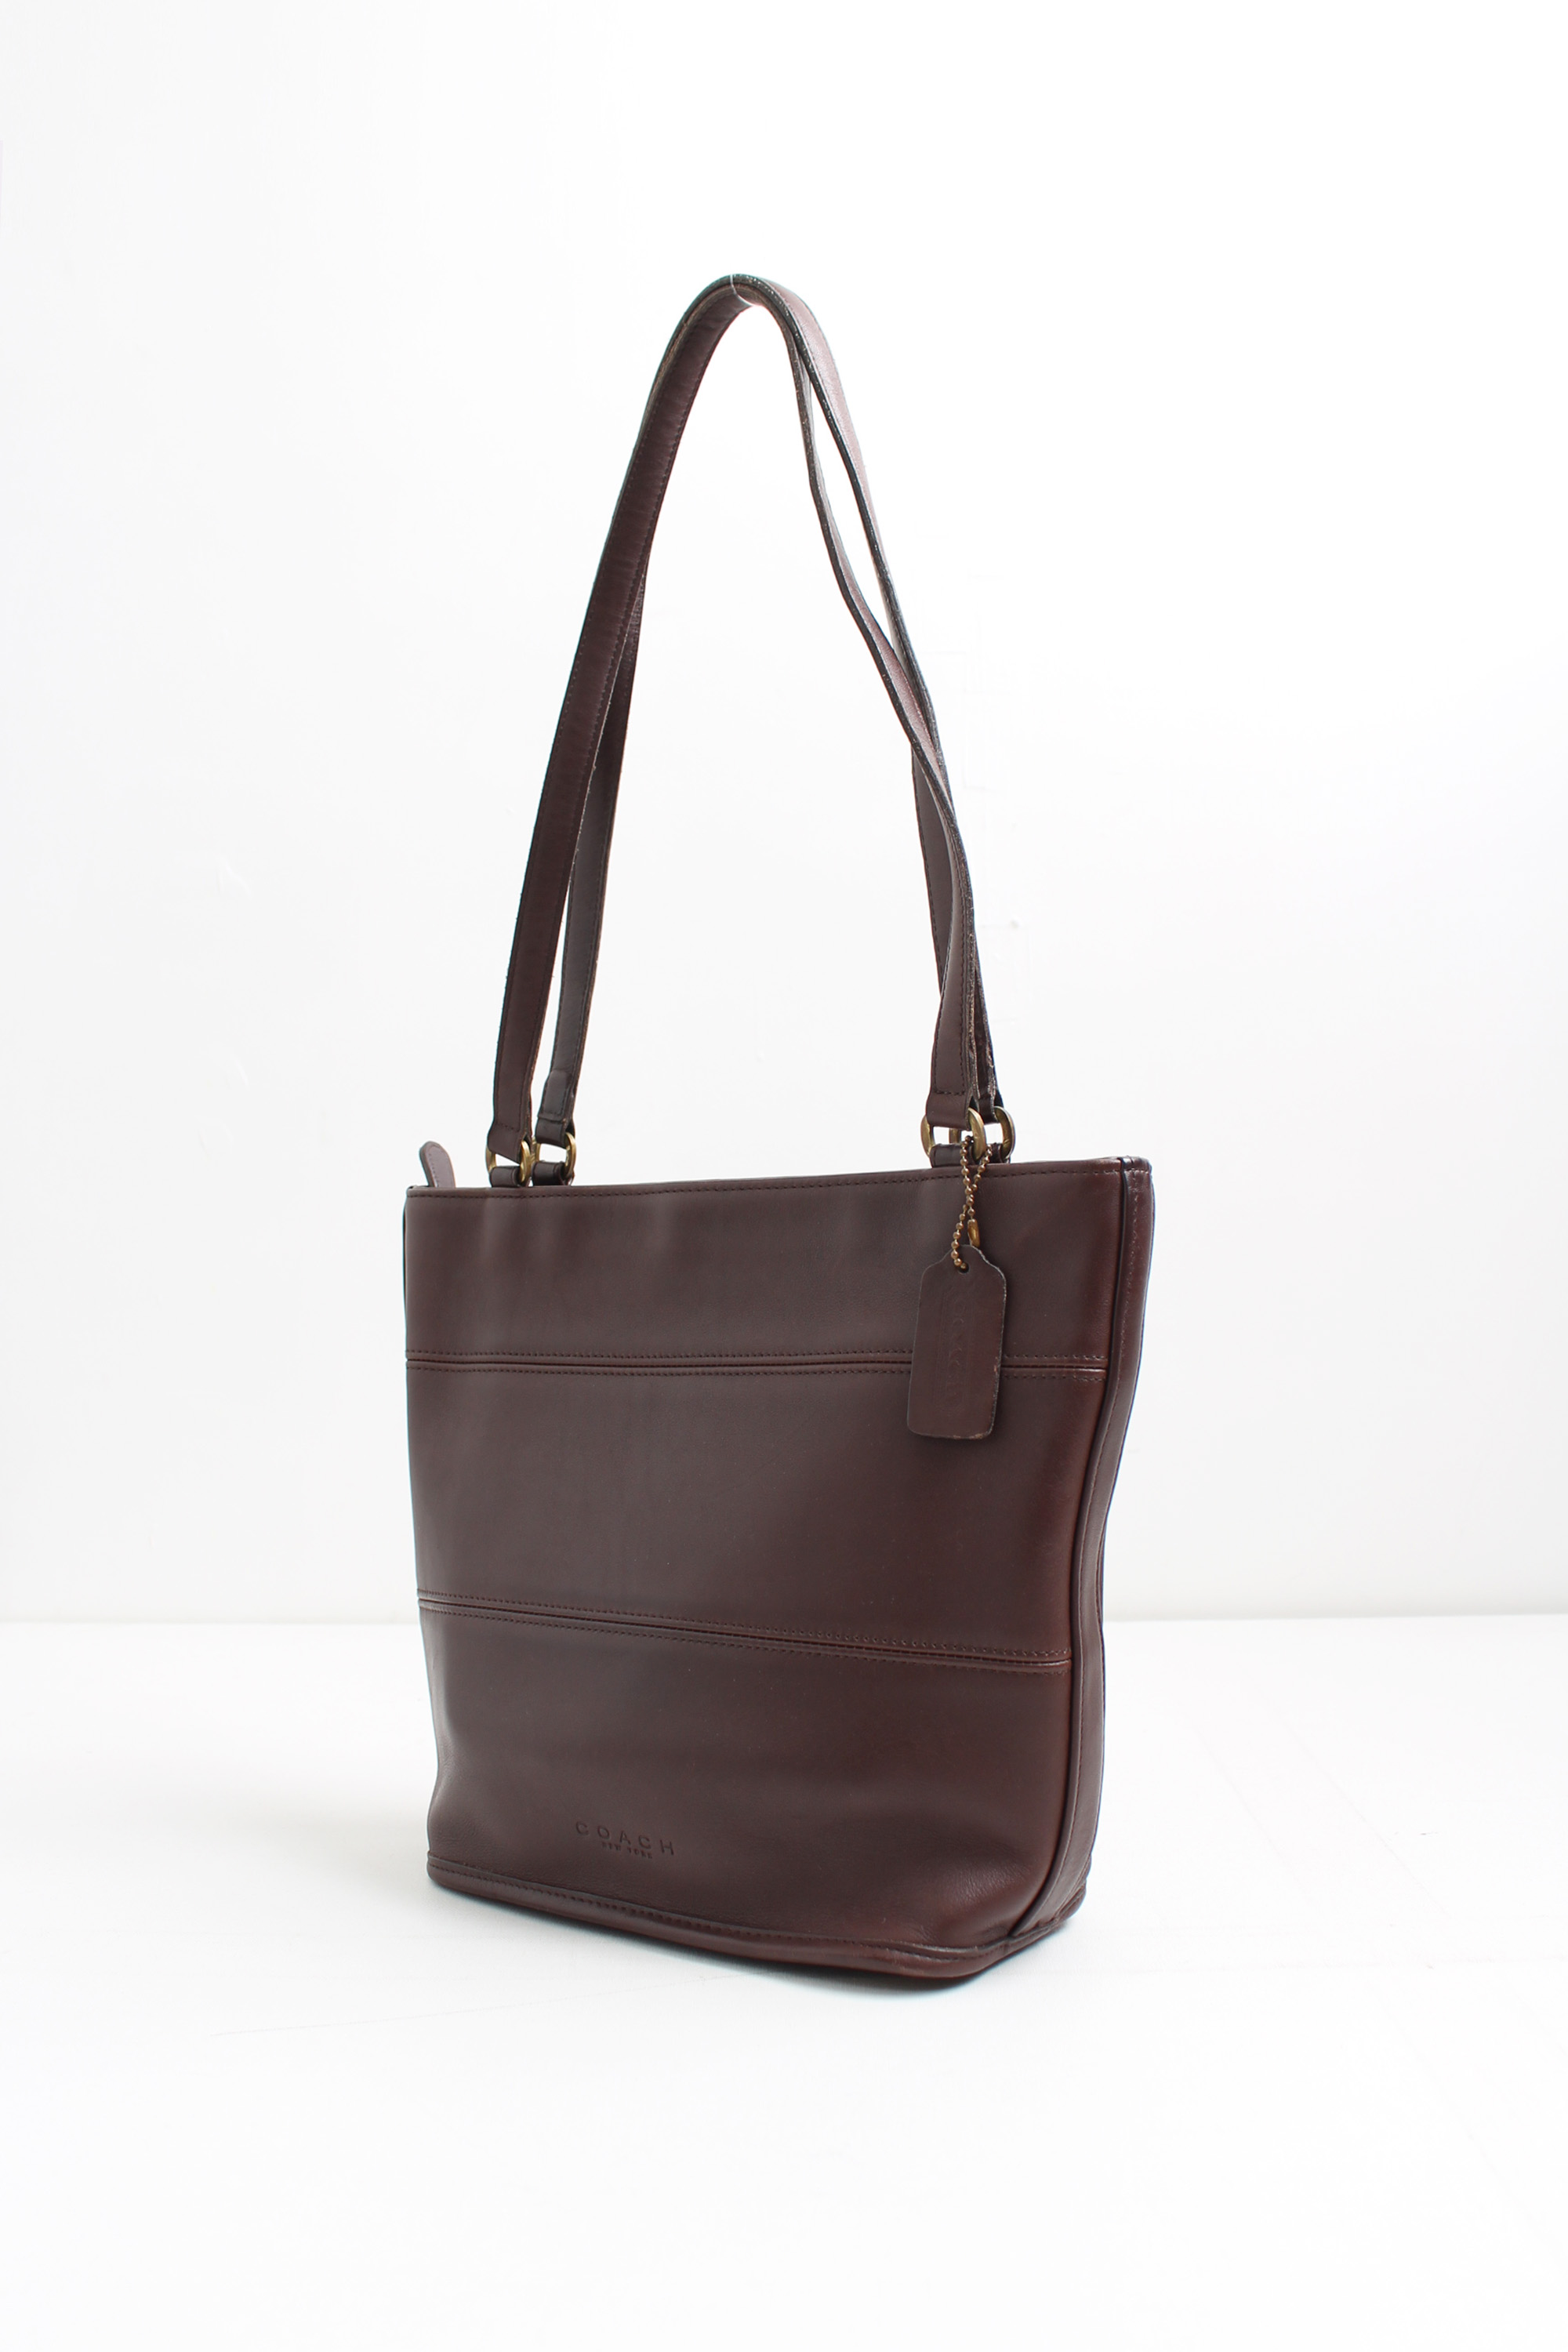 COACH glove-tanned leather bag